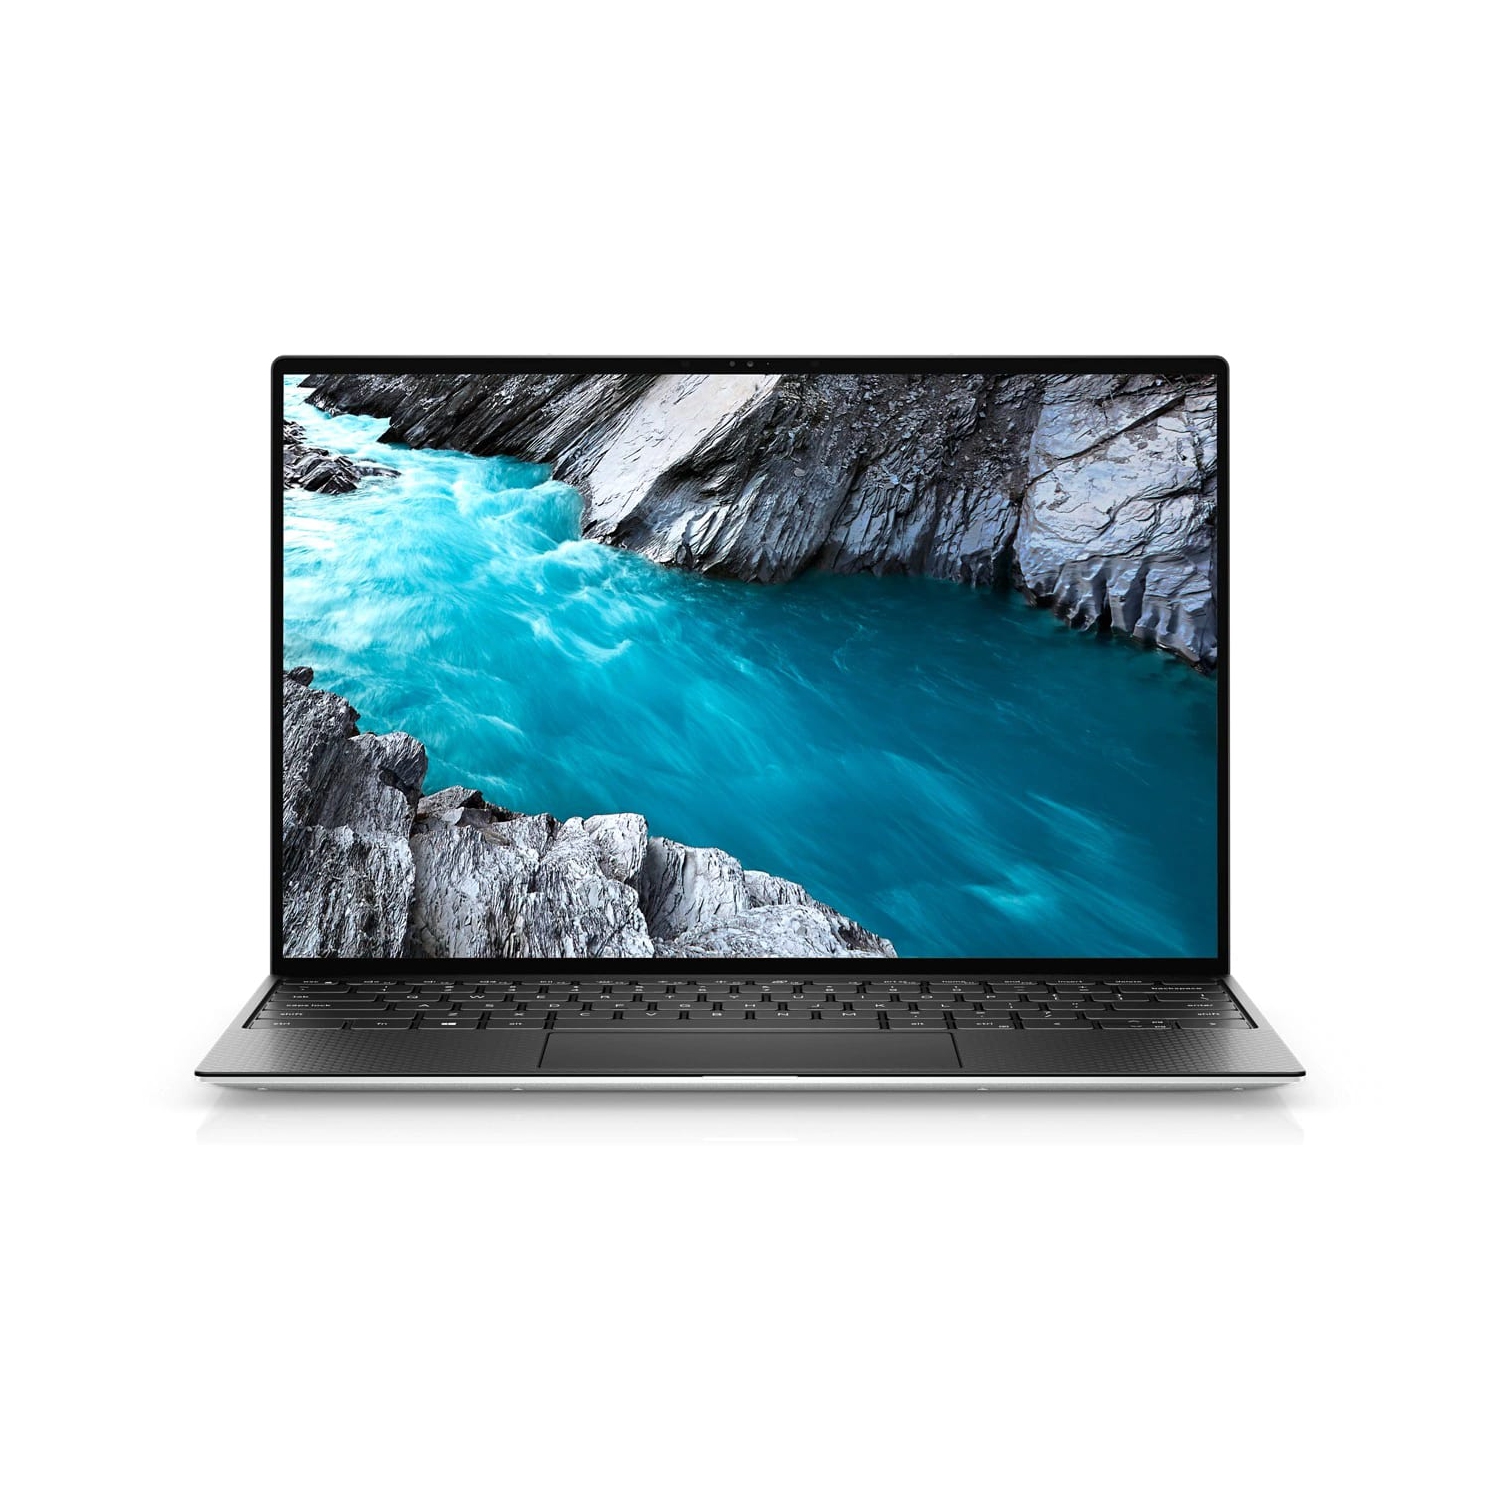 Refurbished (Excellent) - Dell XPS 13 9310 Laptop (2020) | 13.4" 4K Touch | Core i7 - 2TB SSD - 32GB RAM | 4 Cores @ 4.7 GHz - 11th Gen CPU Certified Refurbished